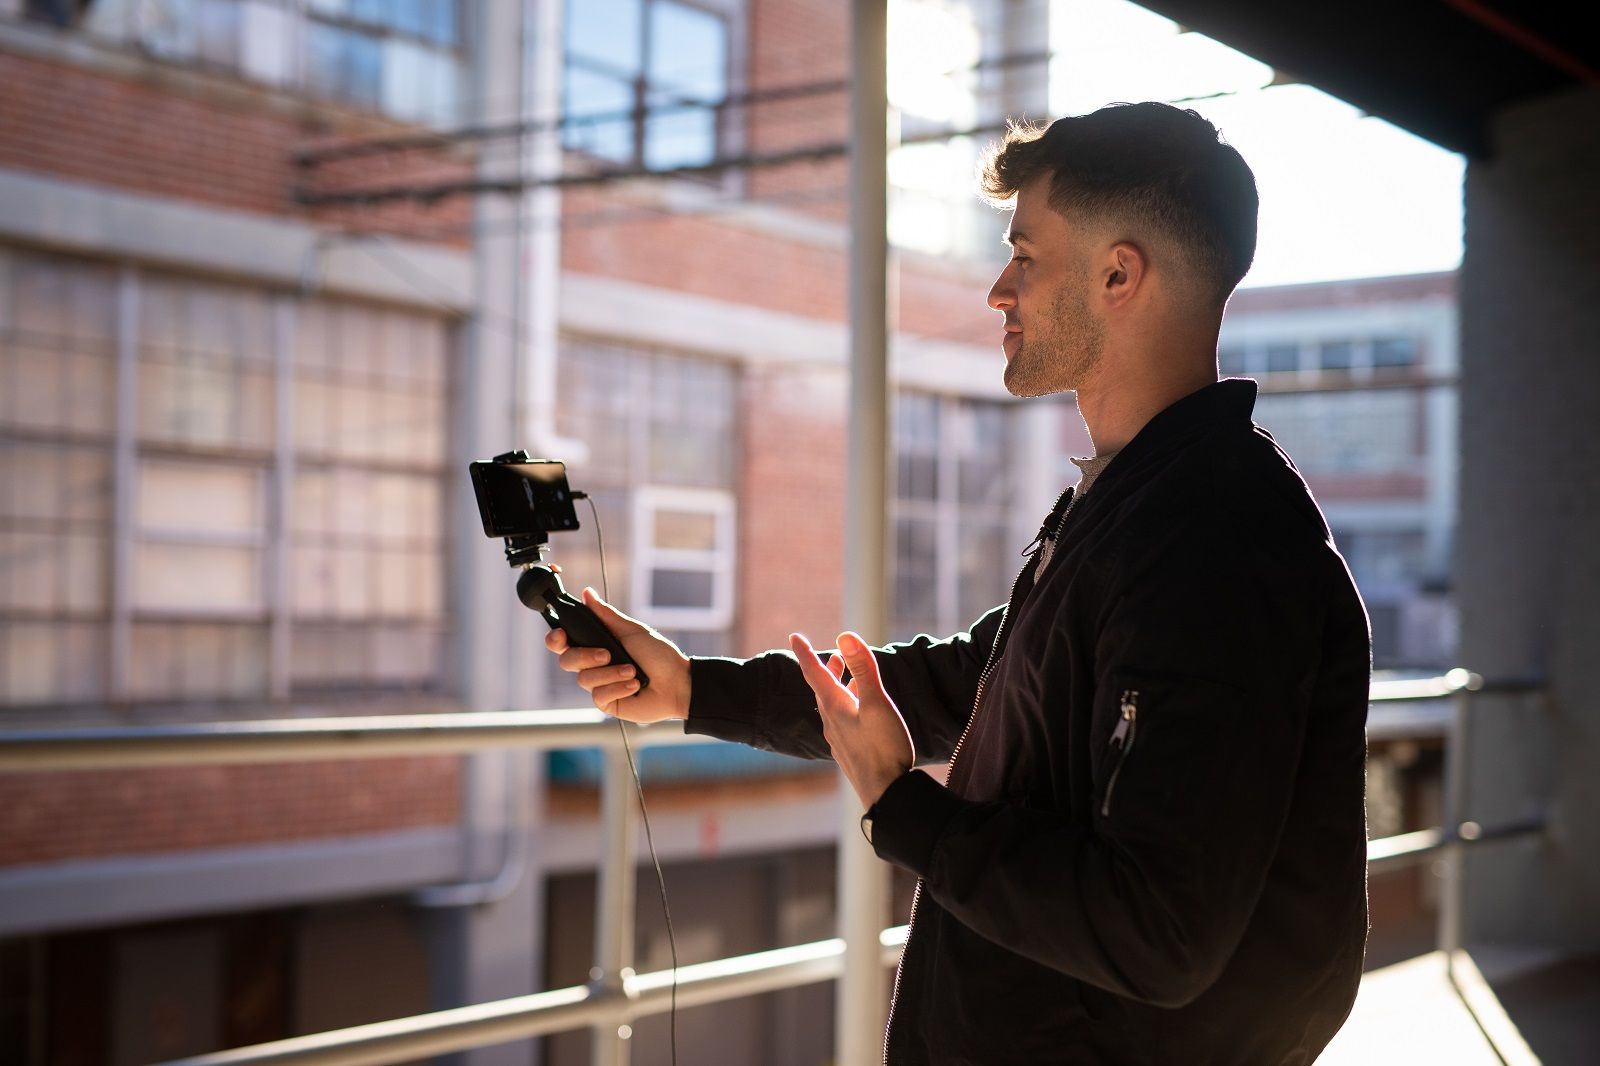 Sennheiser has some new mics aimed at vloggers and content creators photo 2